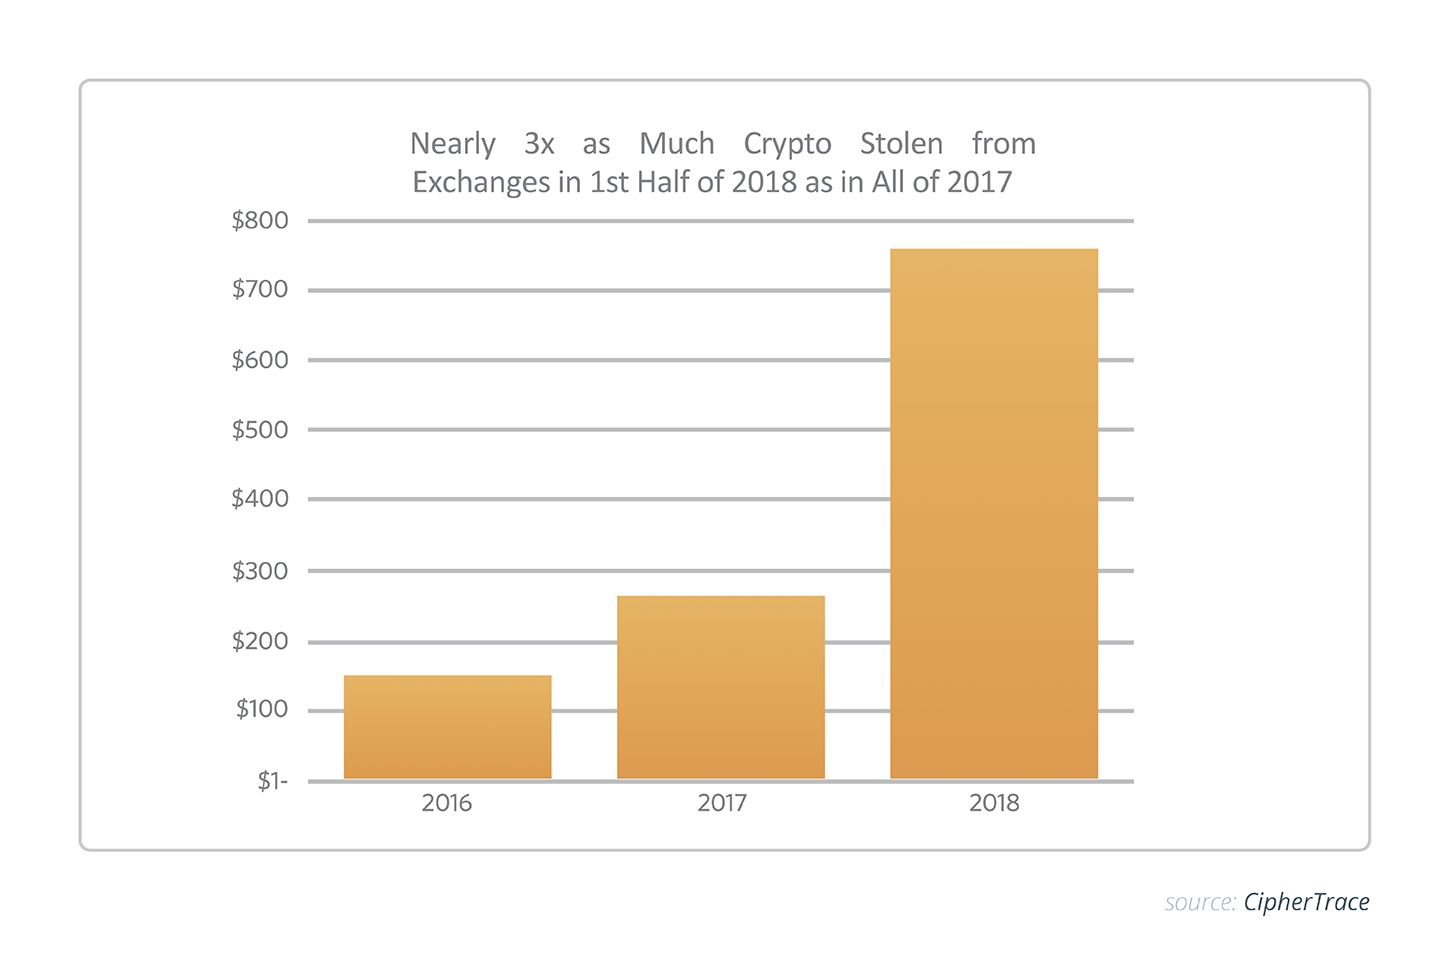 Nearly 3x as Much Crypto Stolen from Exchanges in 1st Half of 2018 as in All of 2017